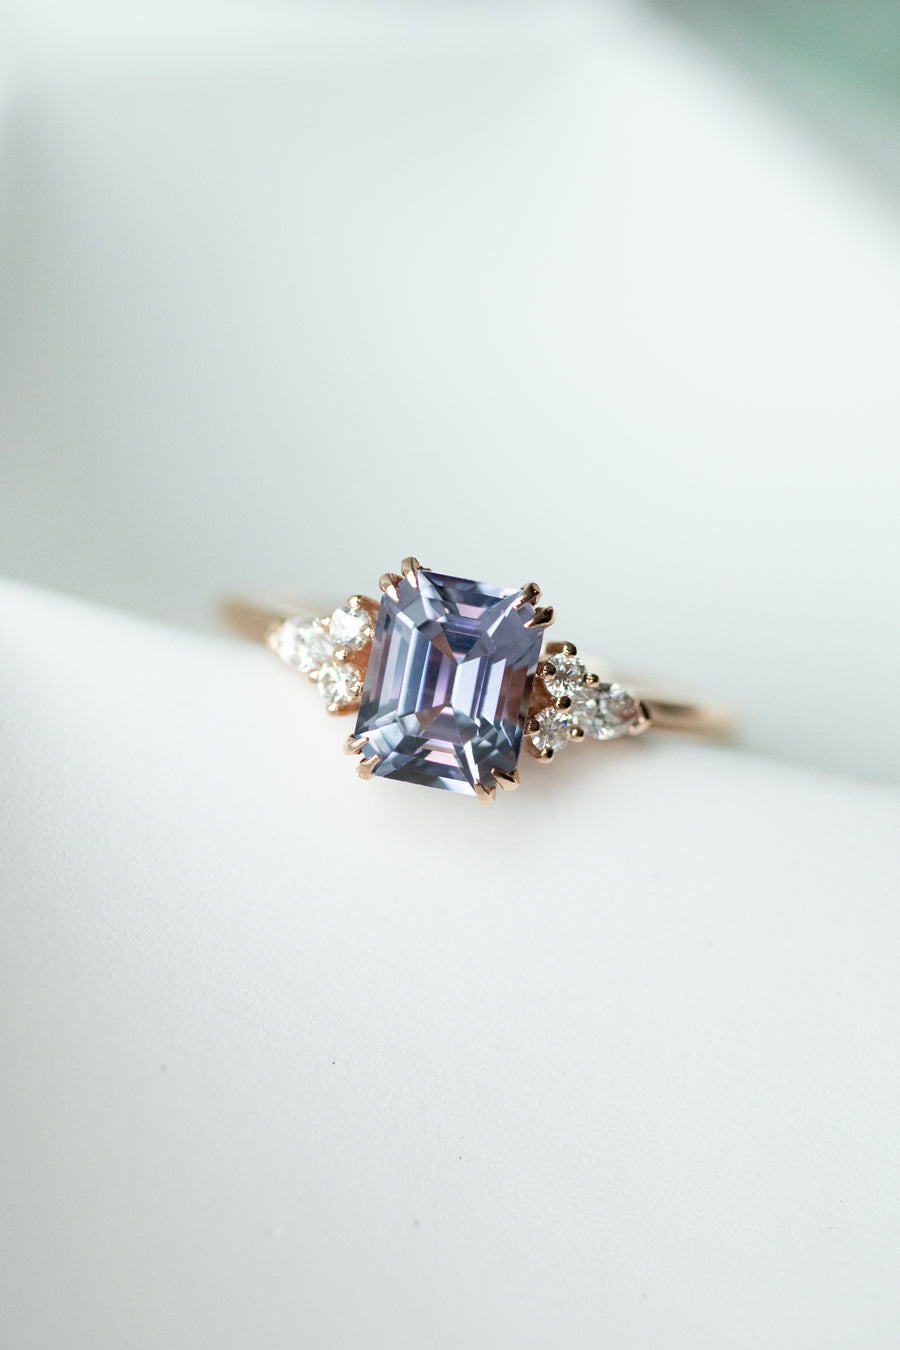 1.12carat Emerald Lavender Spinel & total 0.14carat Round and Marquise Diamonds 18K Rose Gold Ring